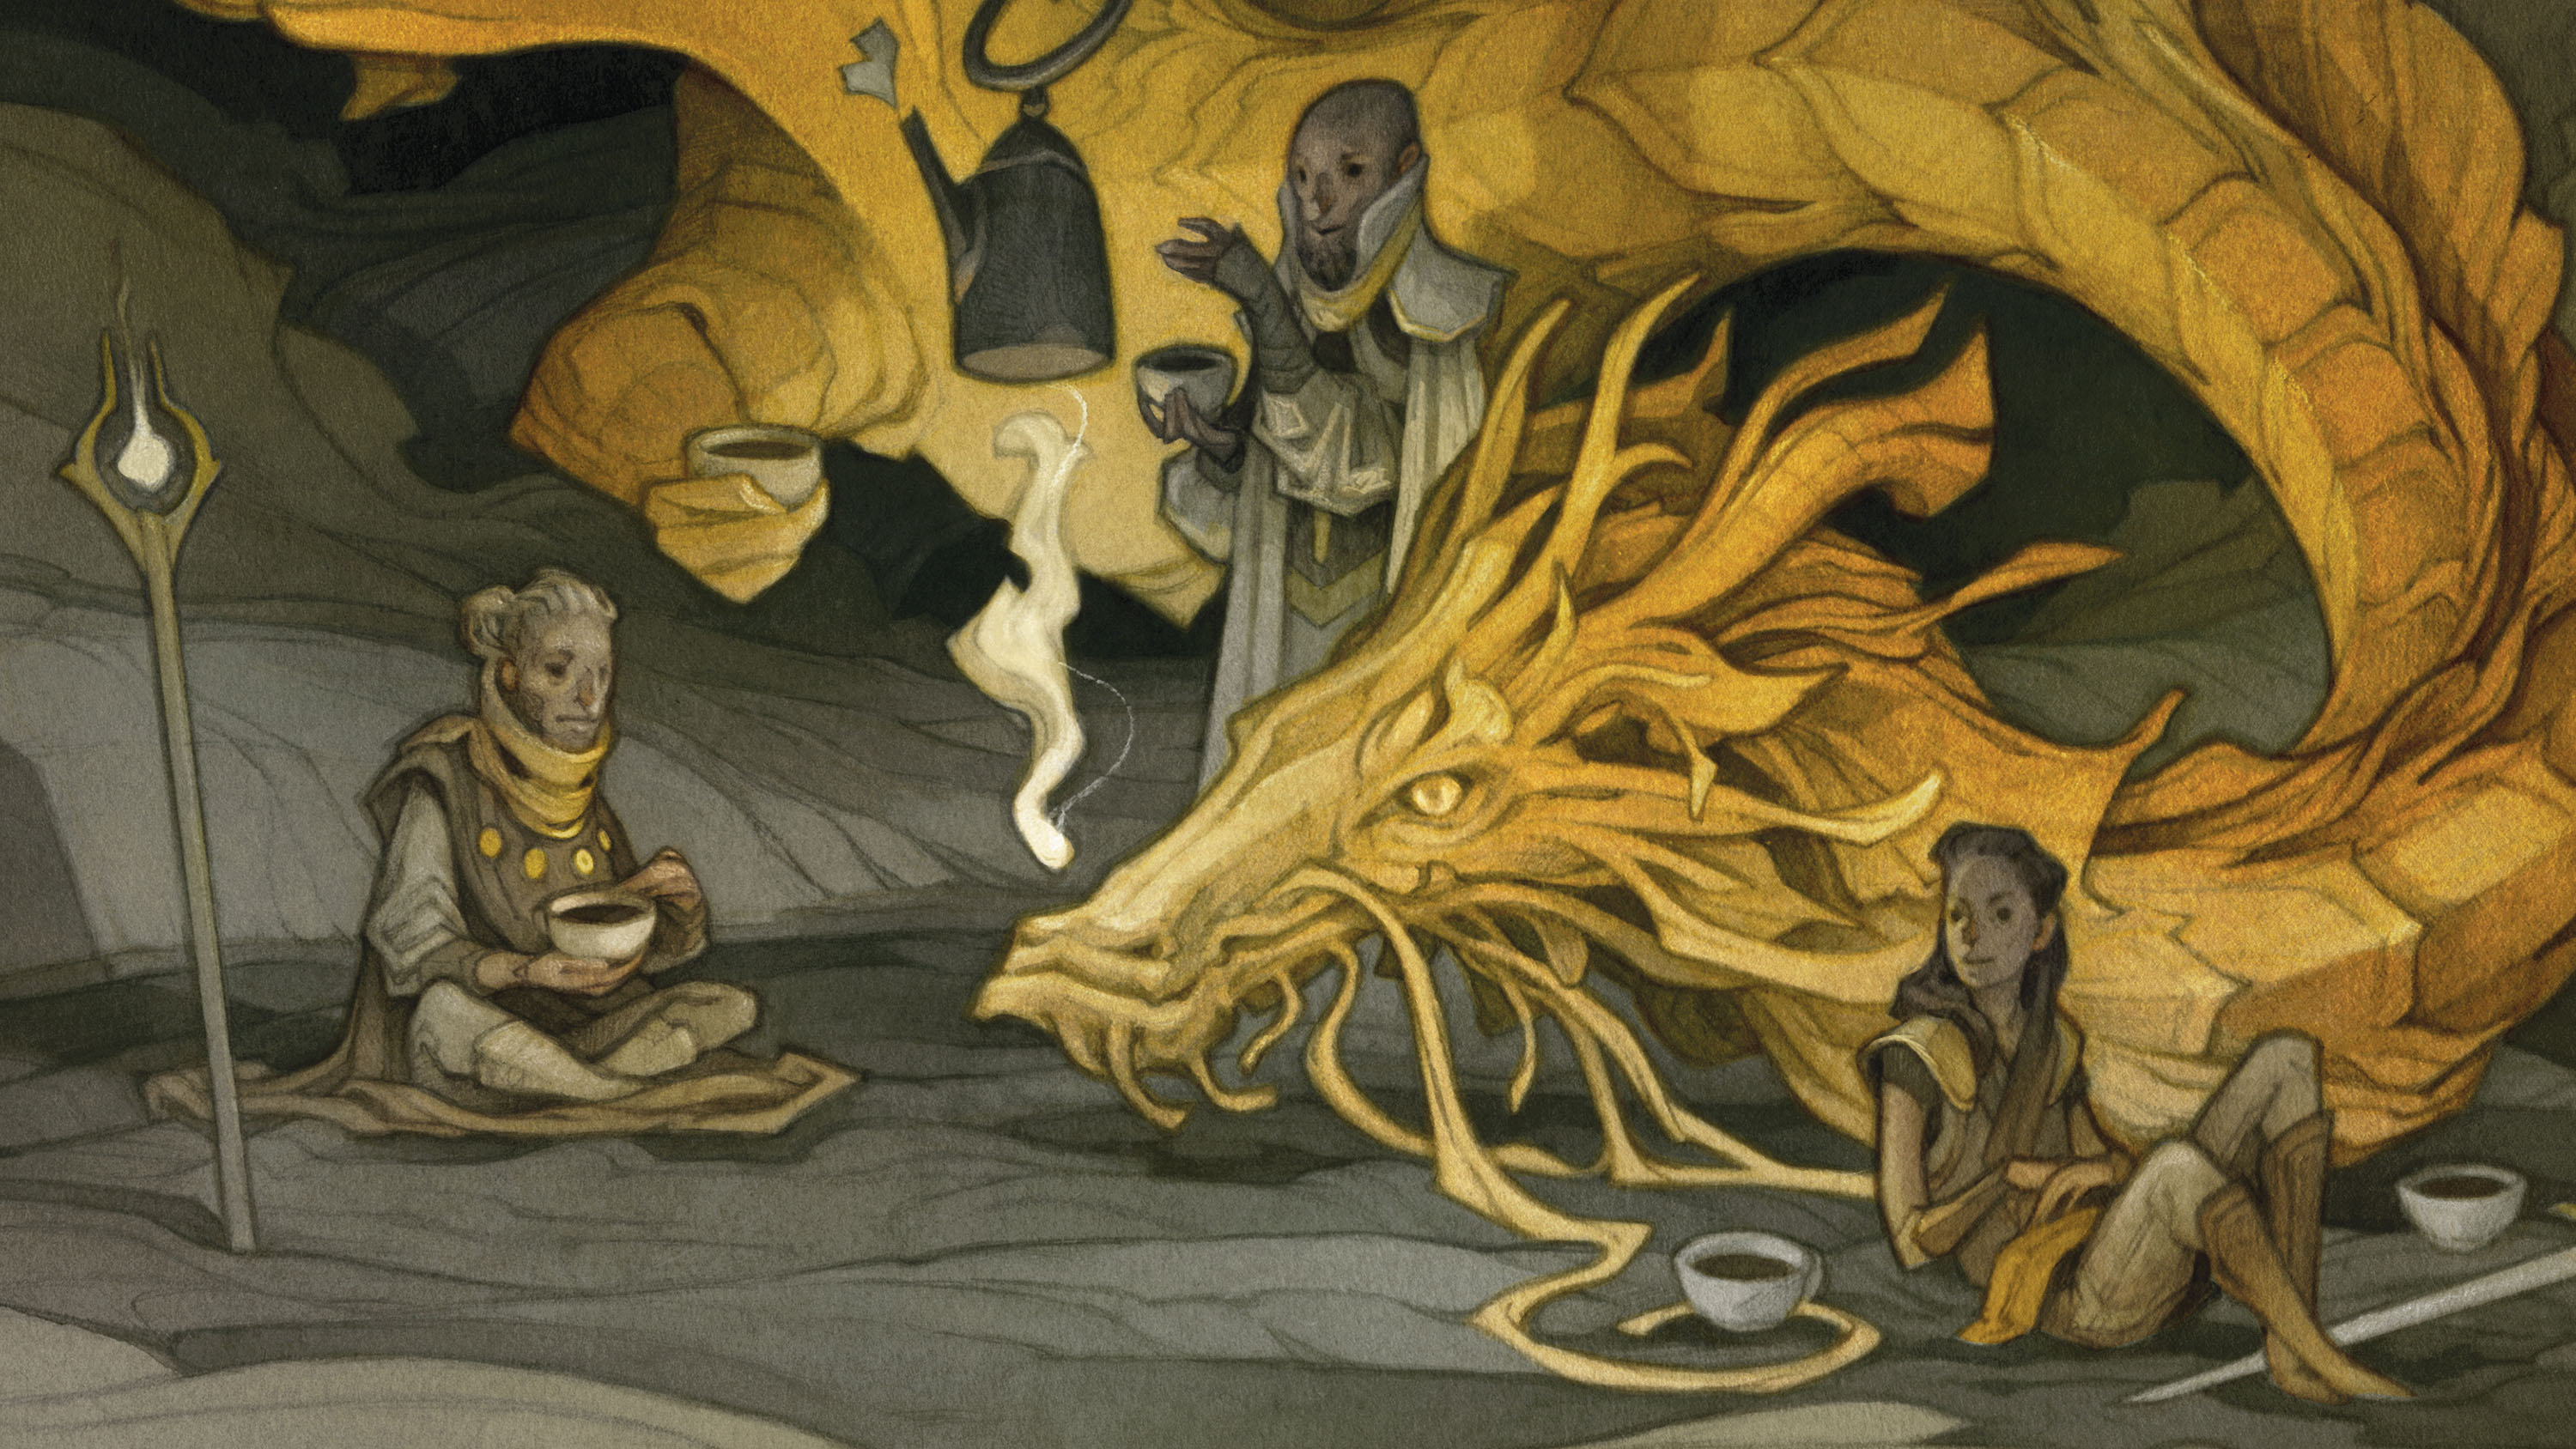 A close-up of a gold dragon making tea for an adventuring party.